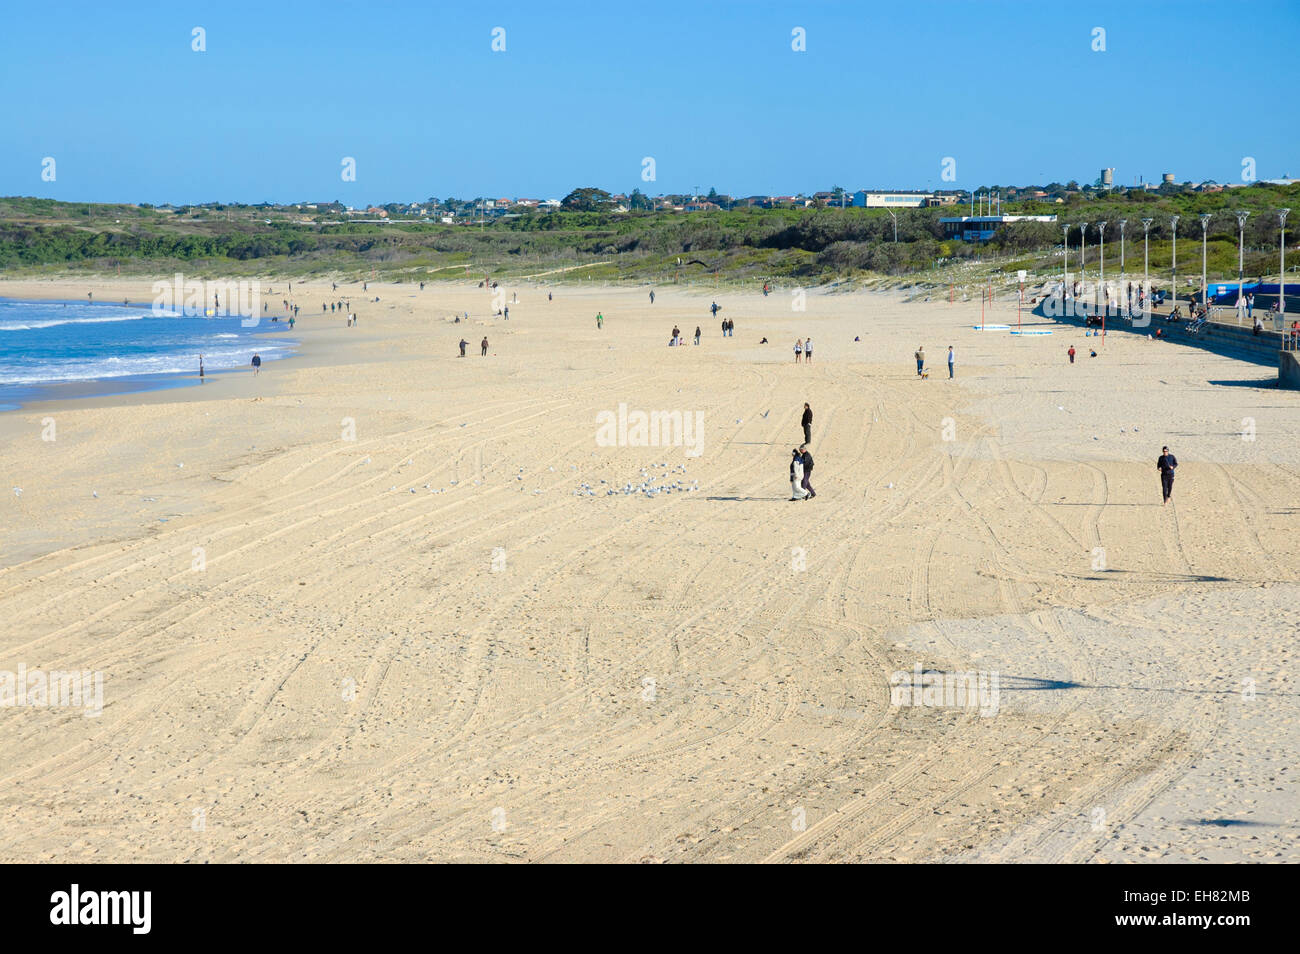 Maroubra Beach in Sydney's south eastern suburbs, Australia, looking south - and looking empty! Stock Photo